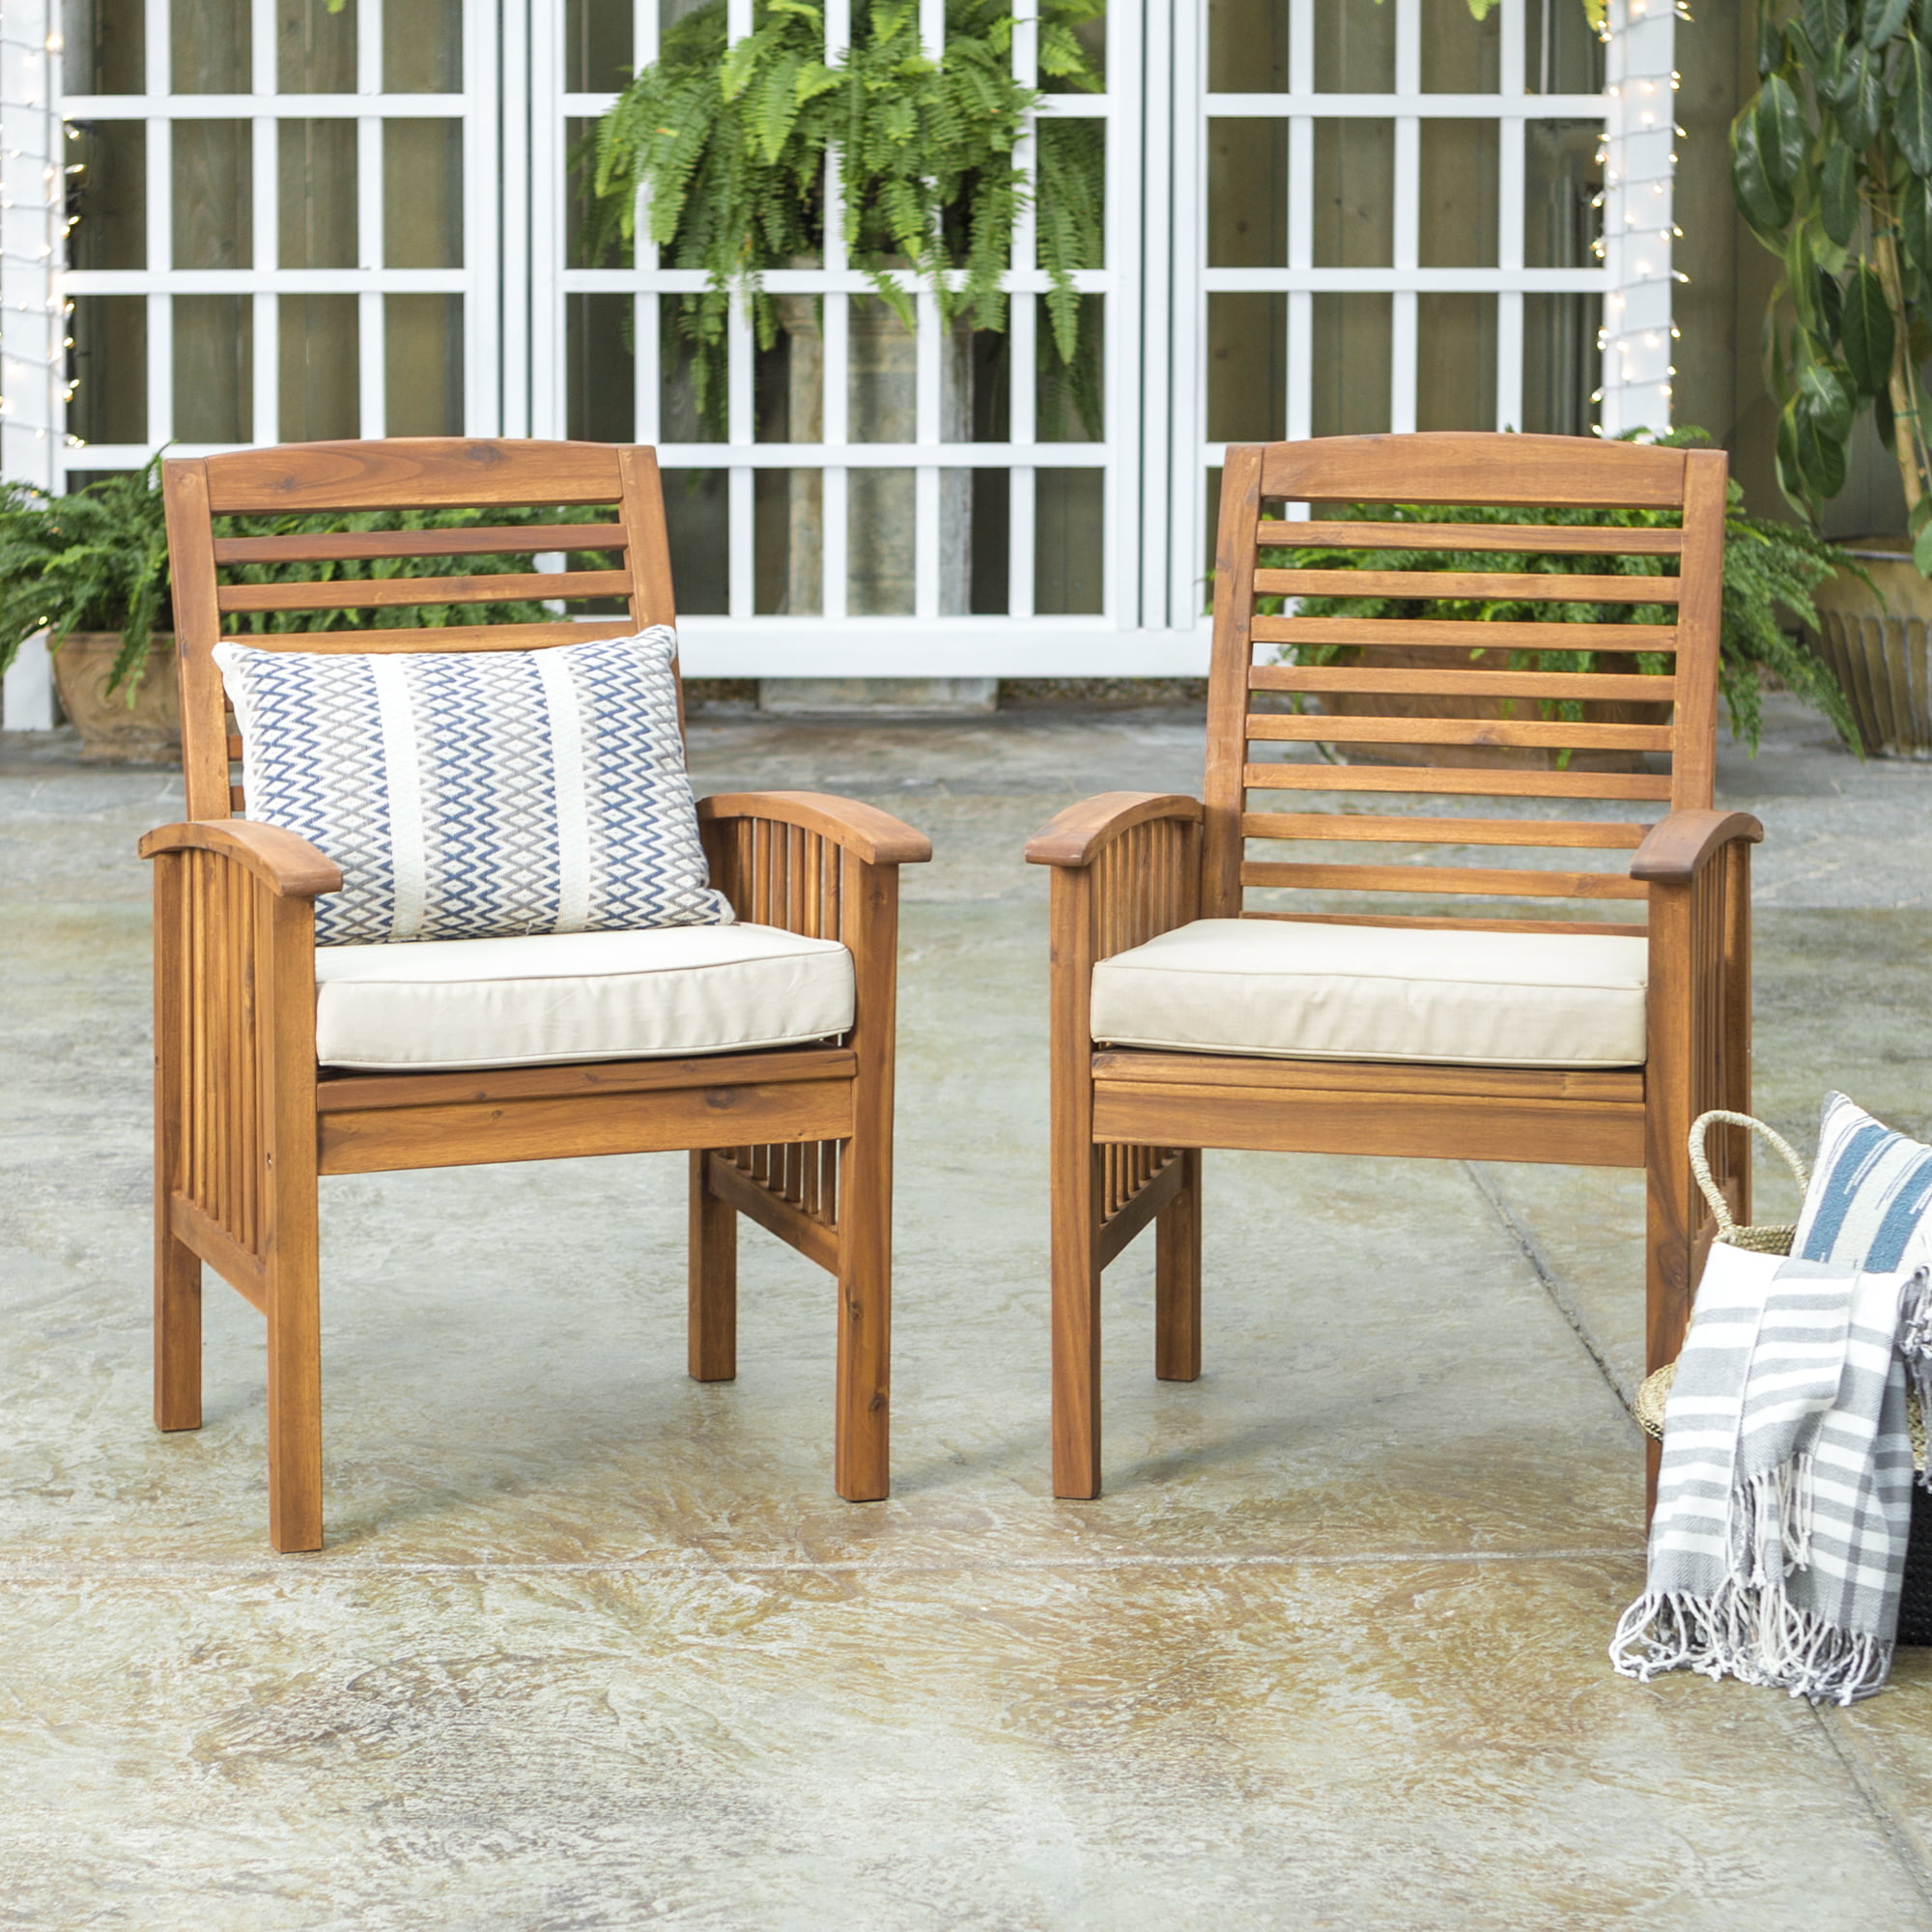 Outdoor Wooden Chairs With Cushions, Outdoor Wooden Chairs With Cushions